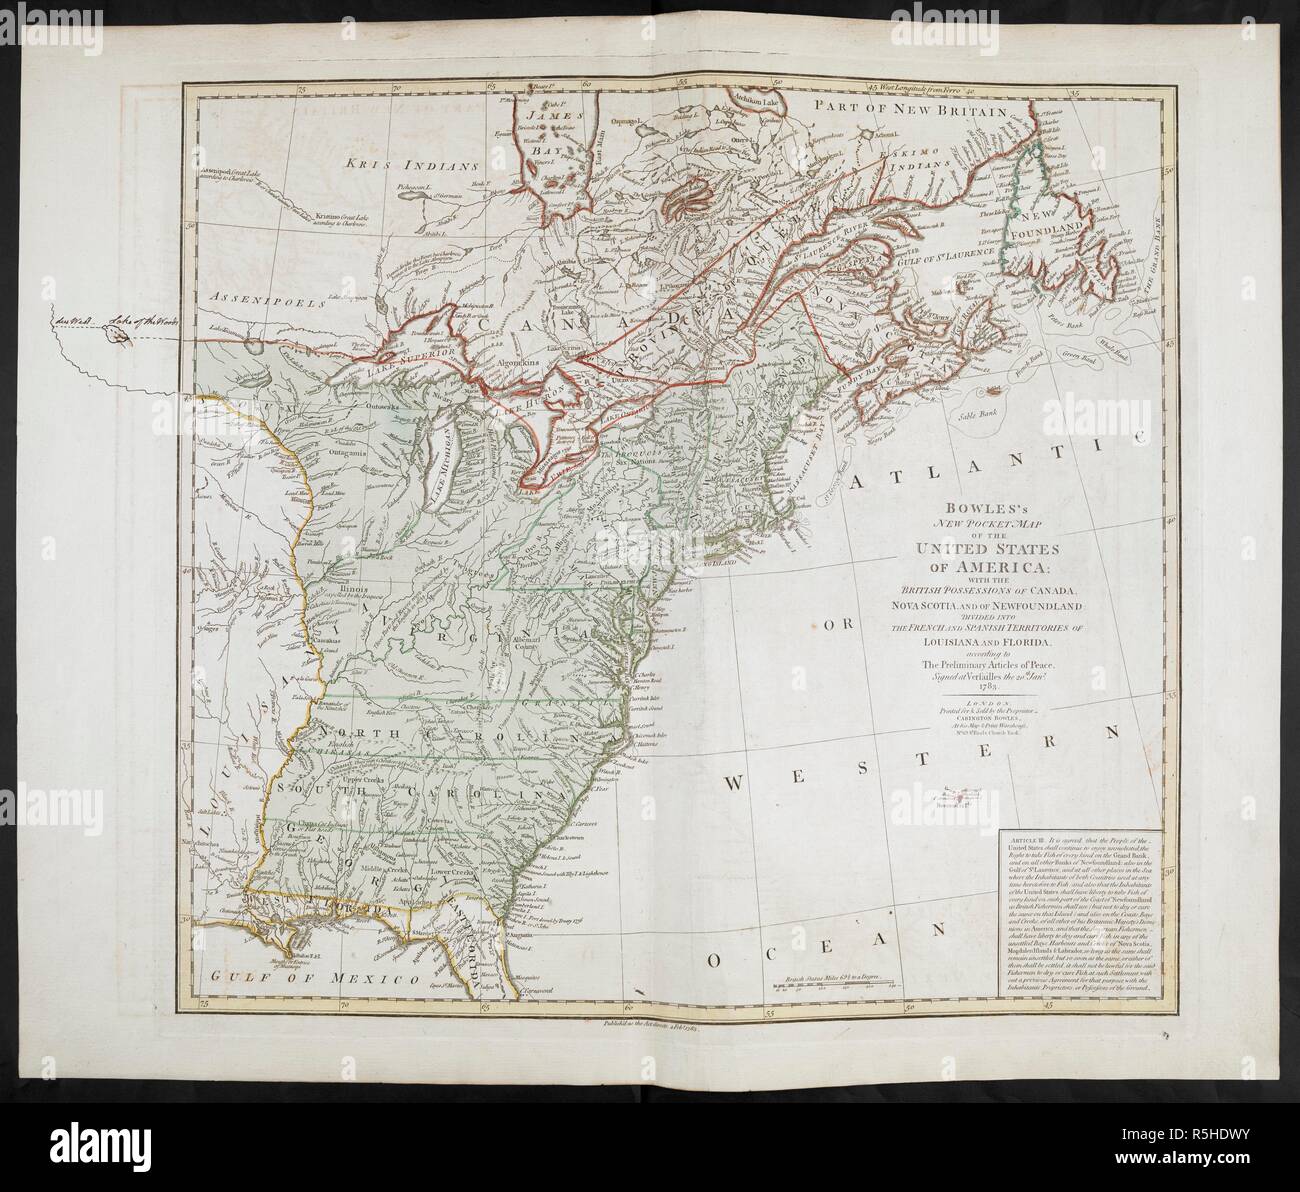 North America: Bowles' engraved map of the United States 1783, with a continuation of the boundary line in MS.   . PLANS of military operations, in North America, etc. 1716-1783. Source: Add. 15535. Stock Photo